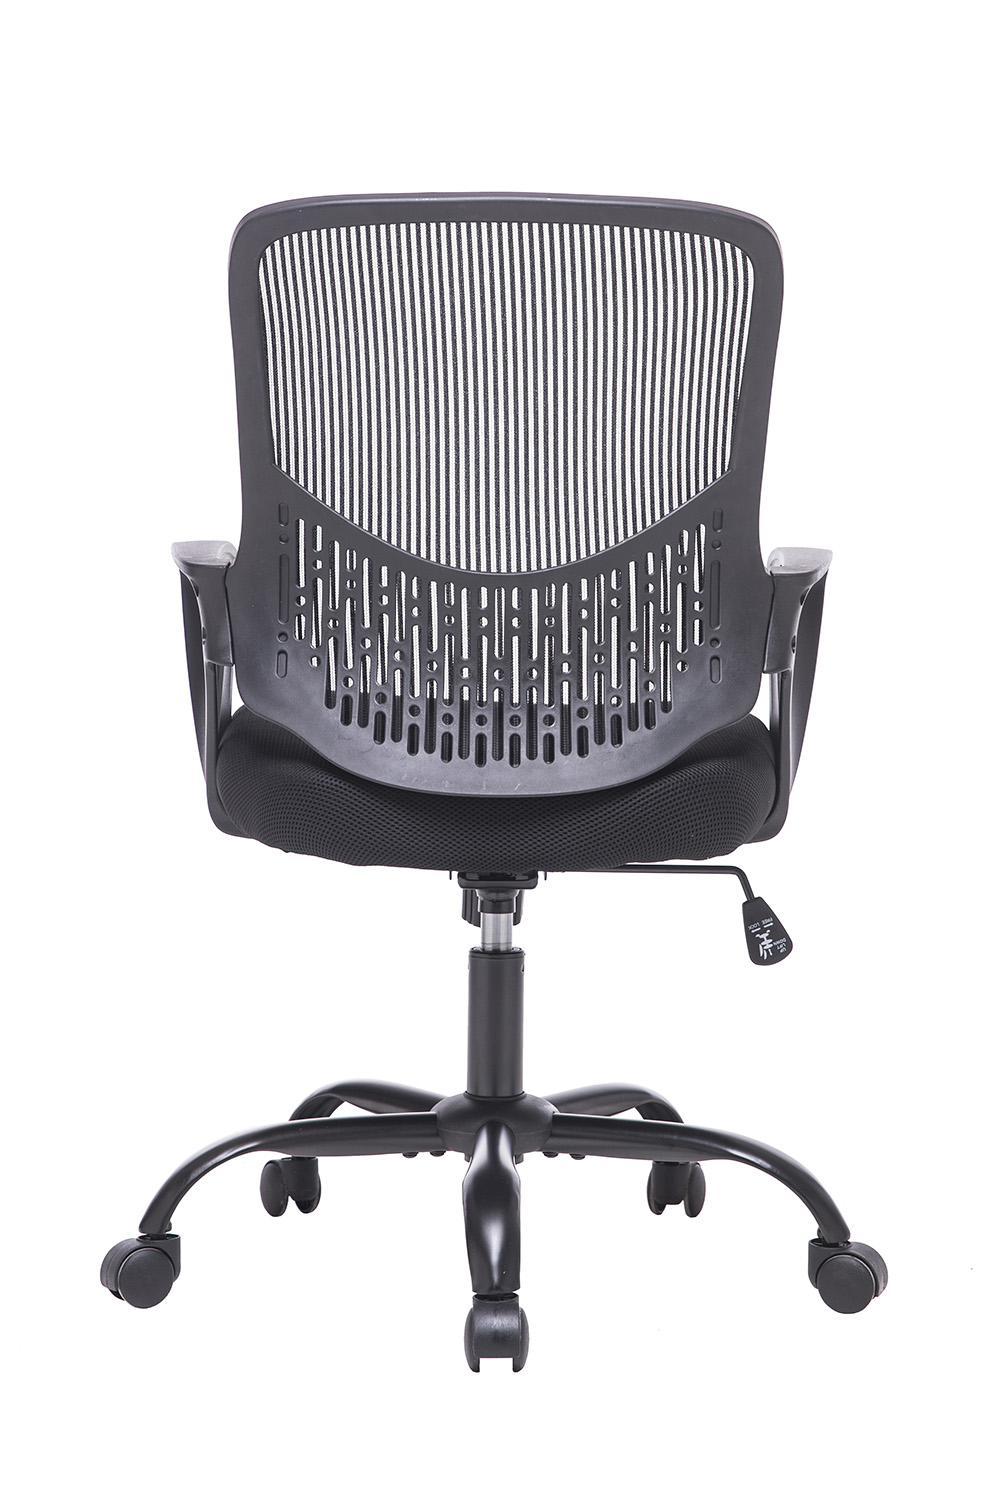 Home Office Rotatable Mesh Chair Height Adjustable with Ergonomic Mid Backrest and Armrest - Black